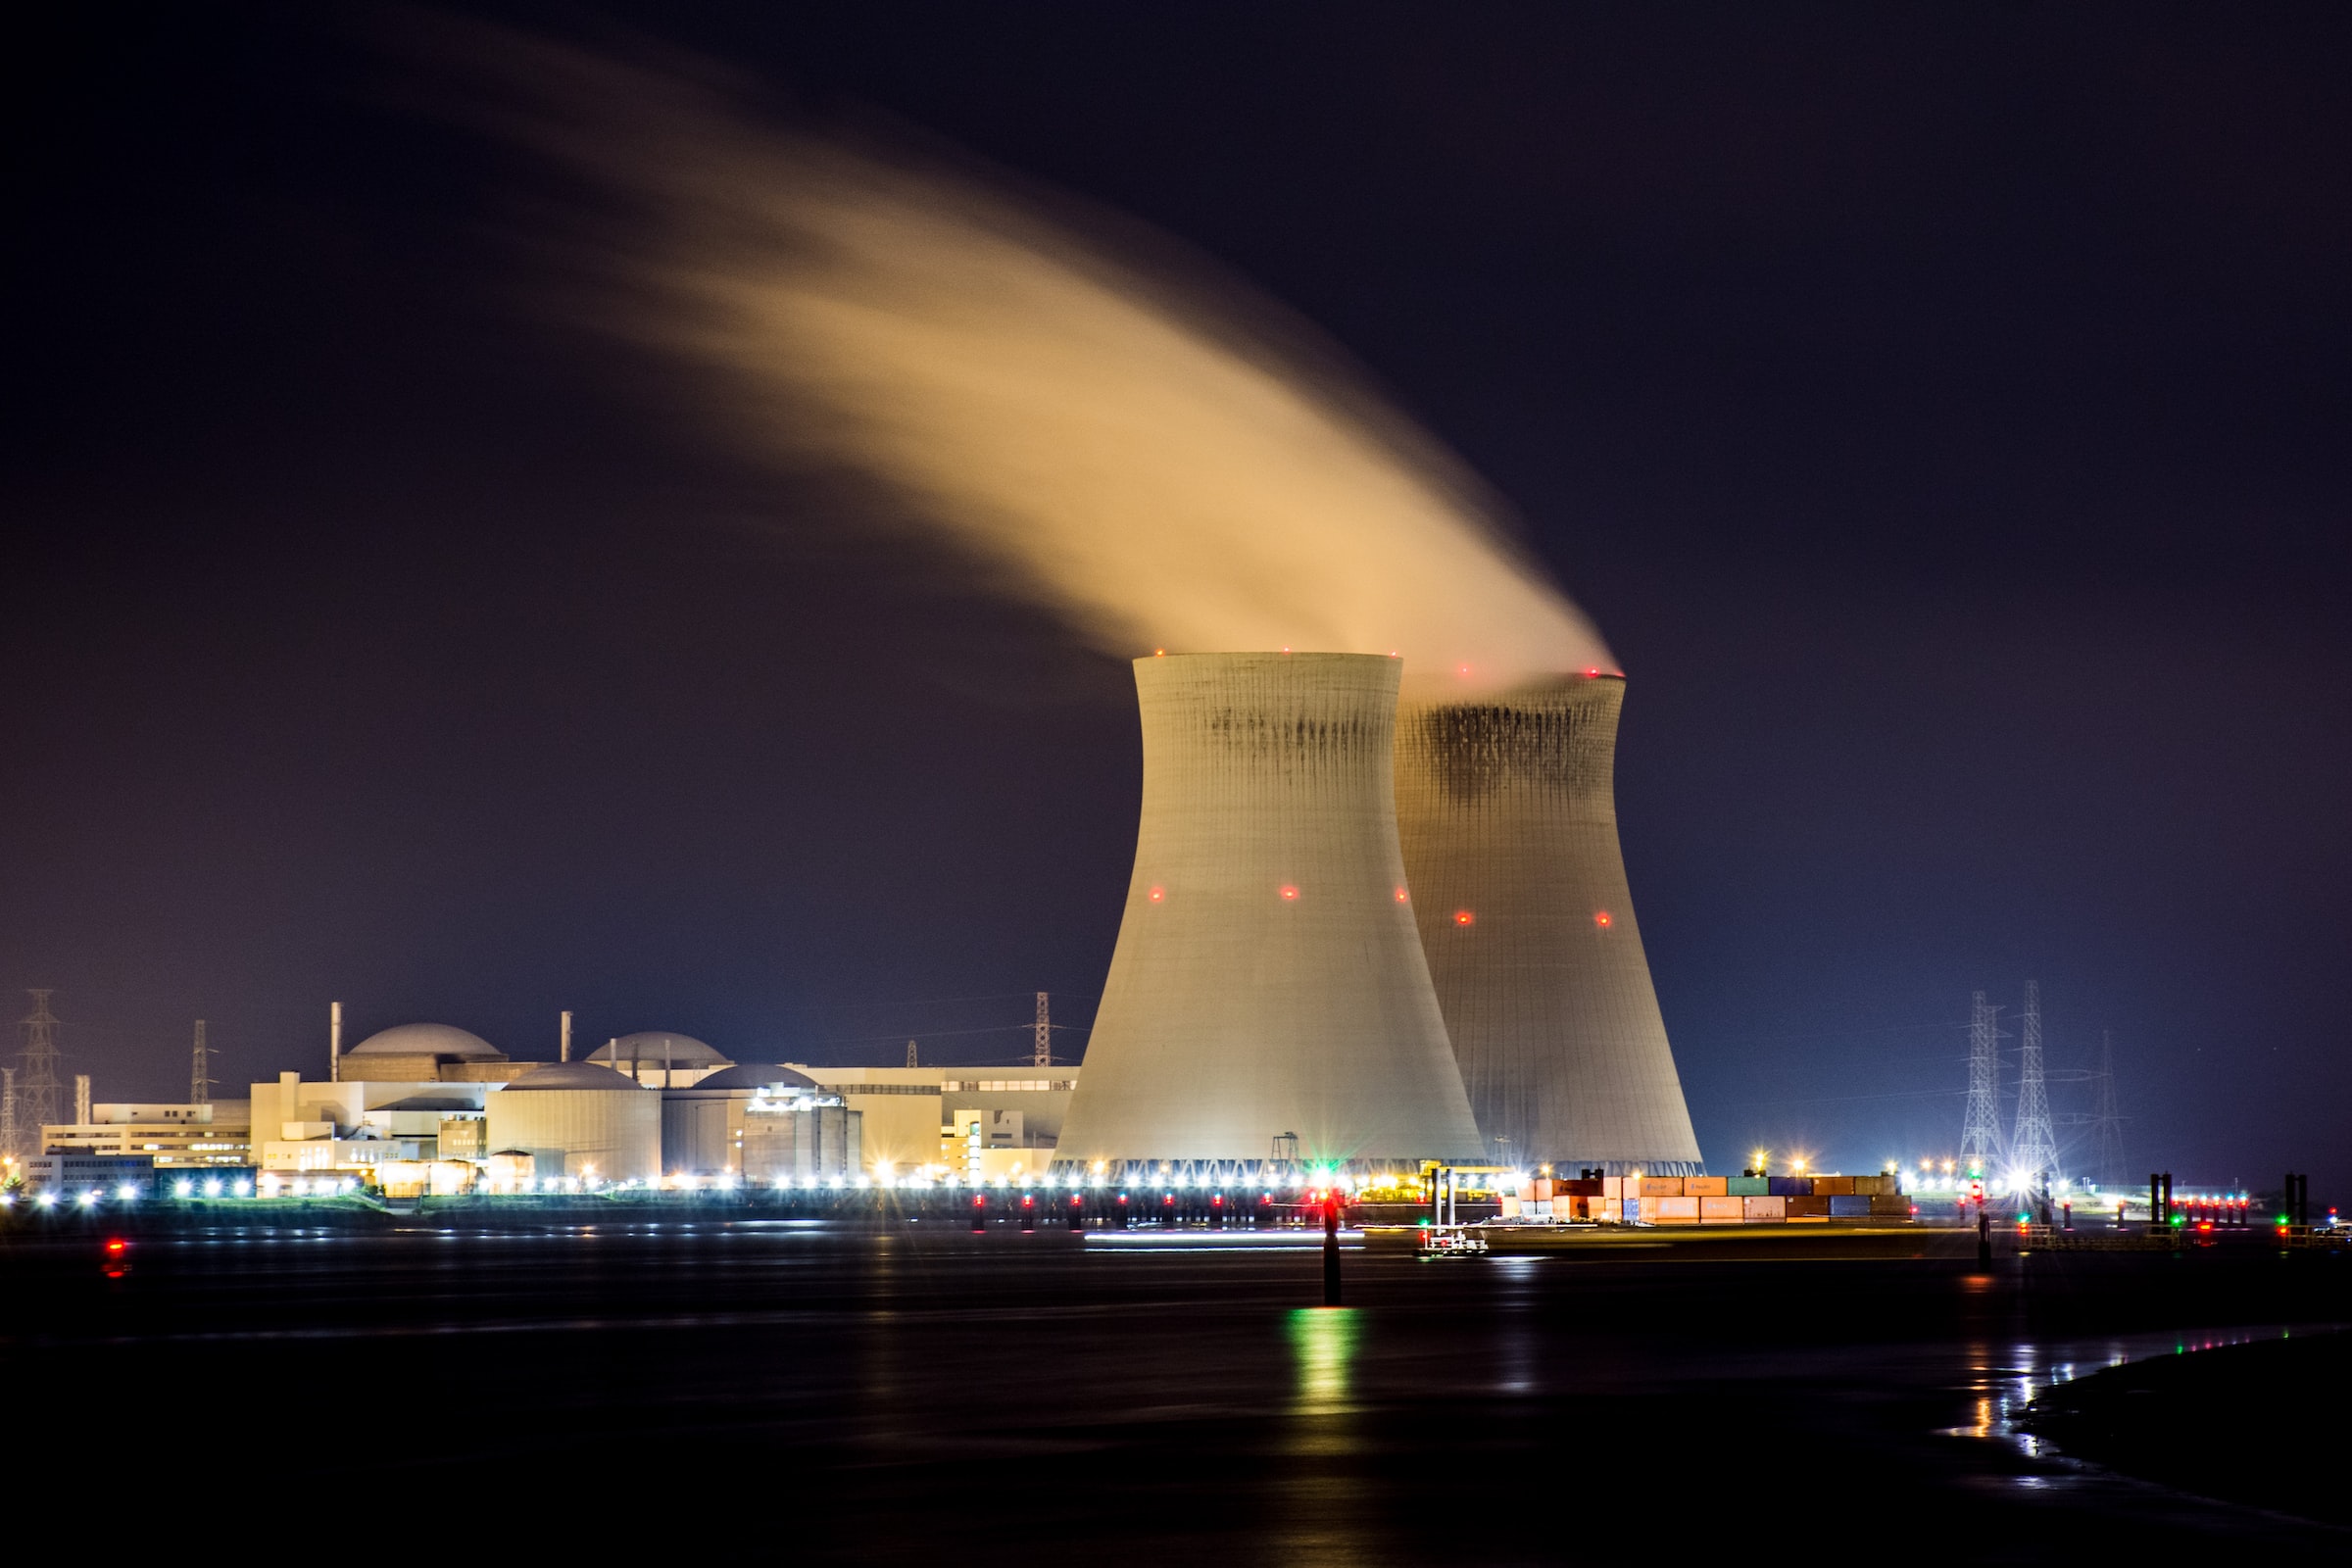 A nuclear power plant at night